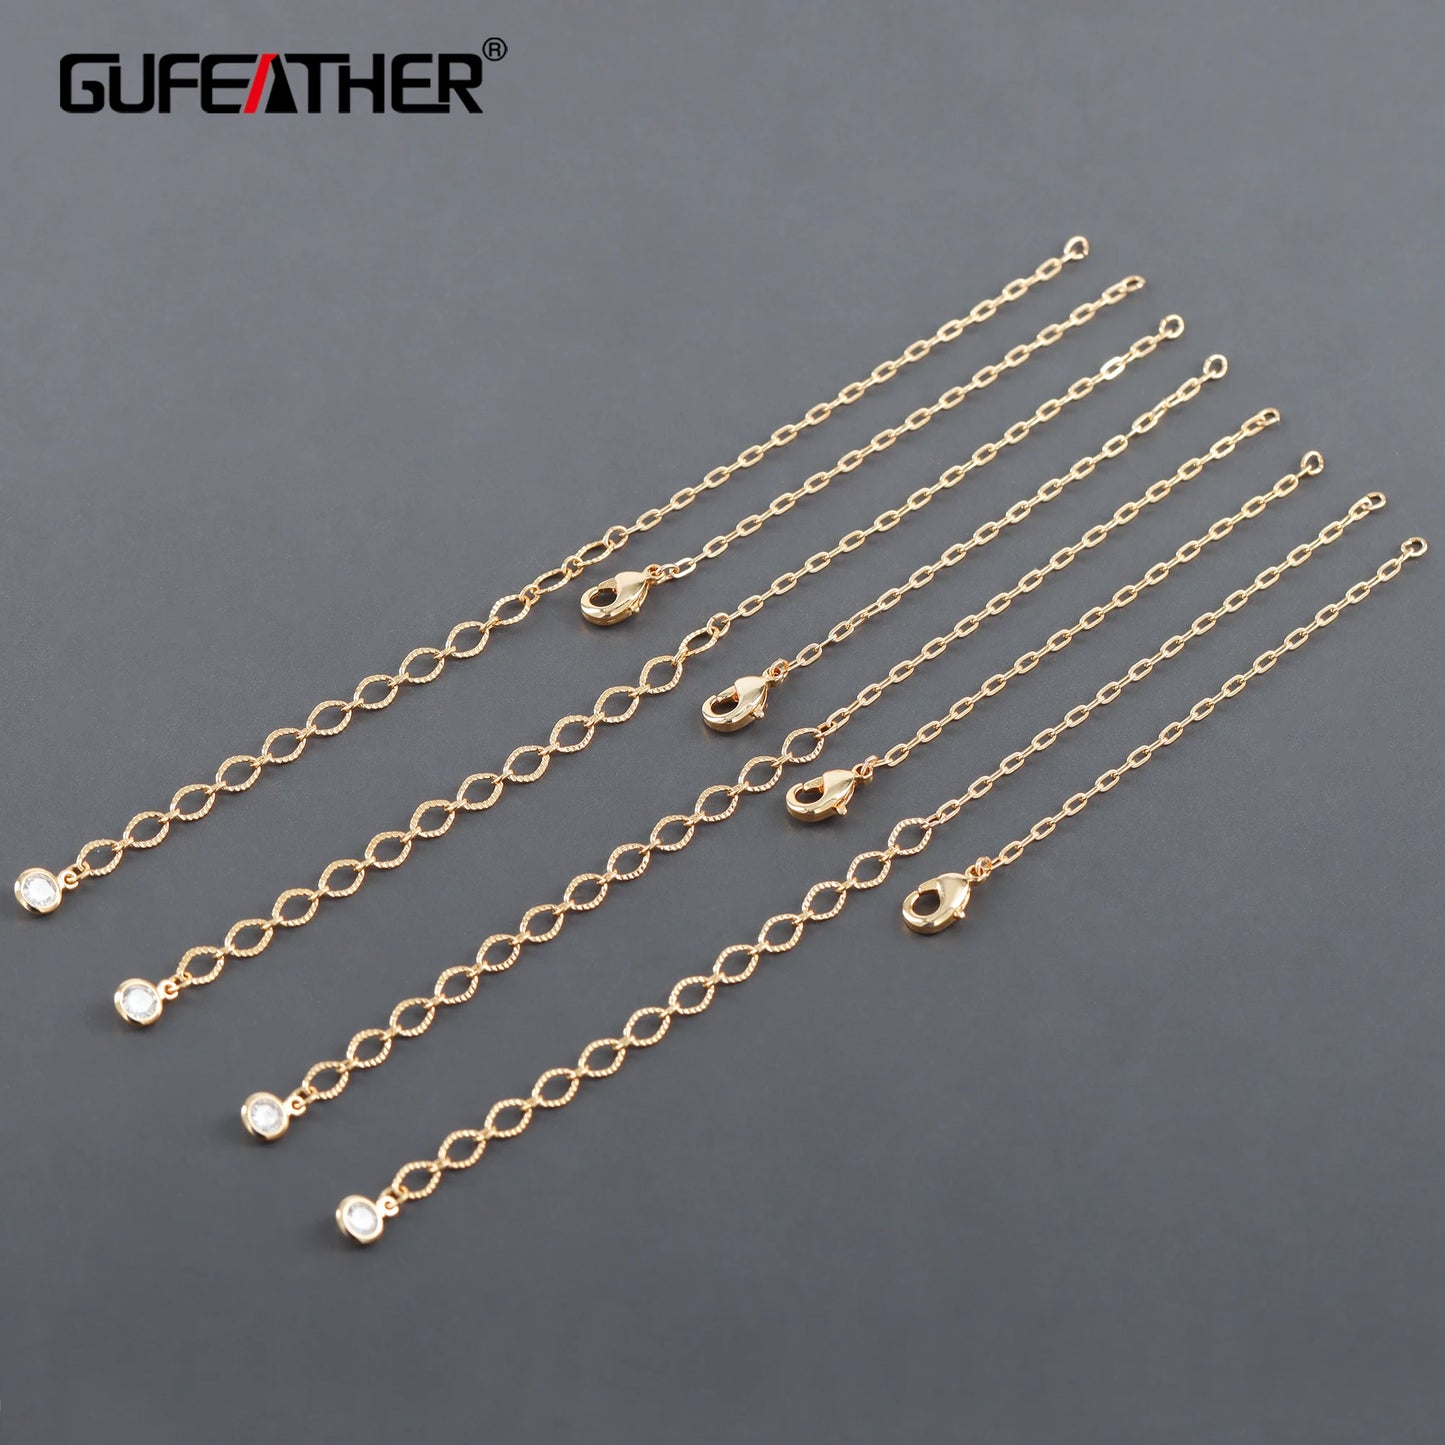 GUFEATHER M1138,jewelry accessories,diy bracelet,extend chain,pass REACH,nickel free,18k gold plated,copper,diy jewelry,2pcs/lot